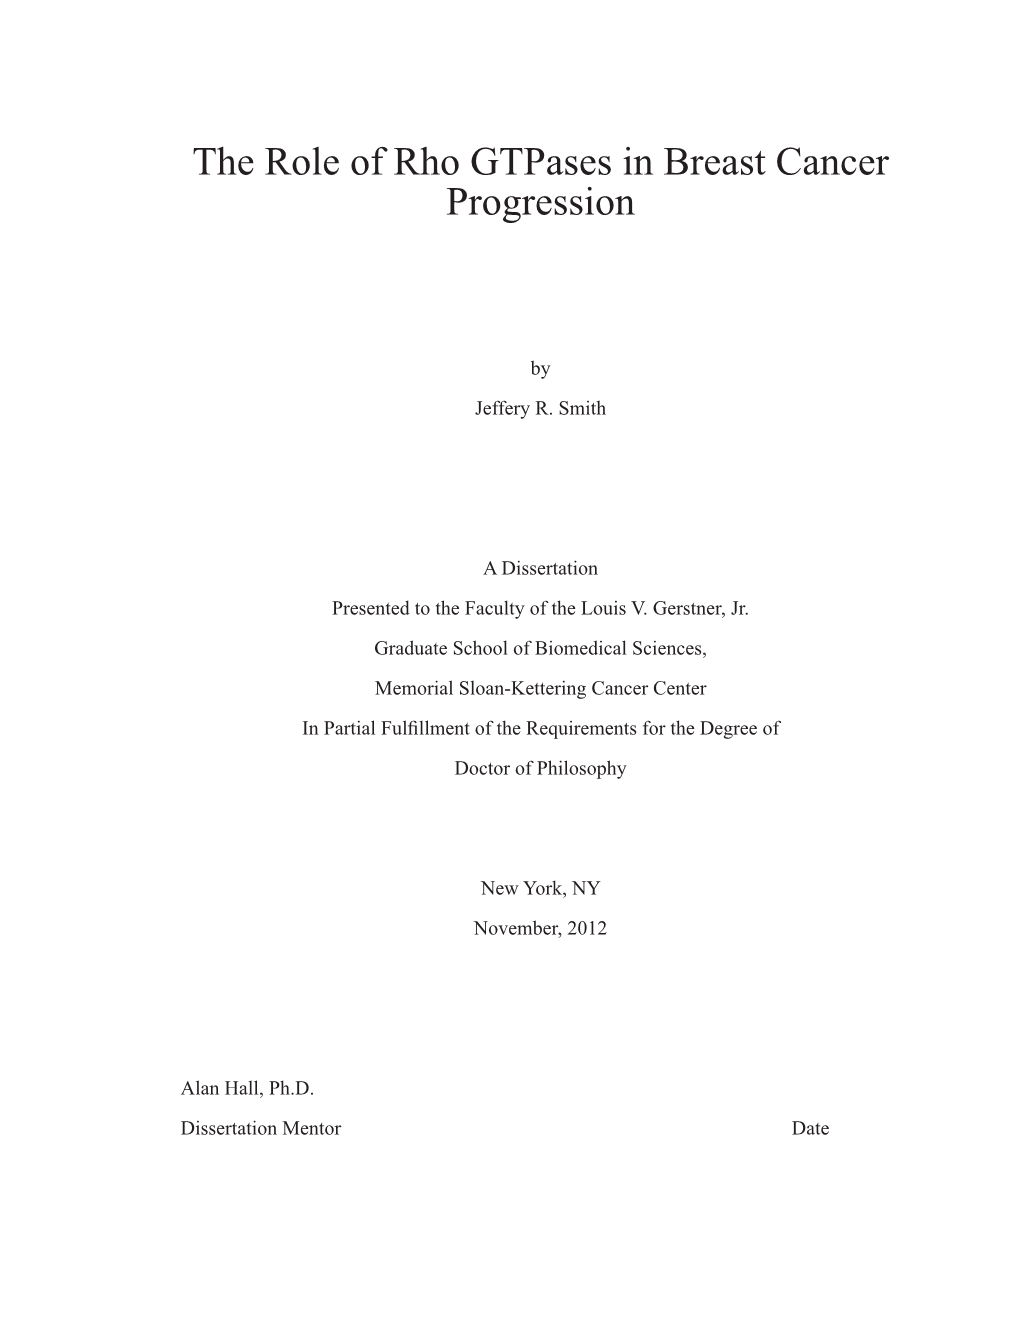 The Role of Rho Gtpases in Breast Cancer Progression